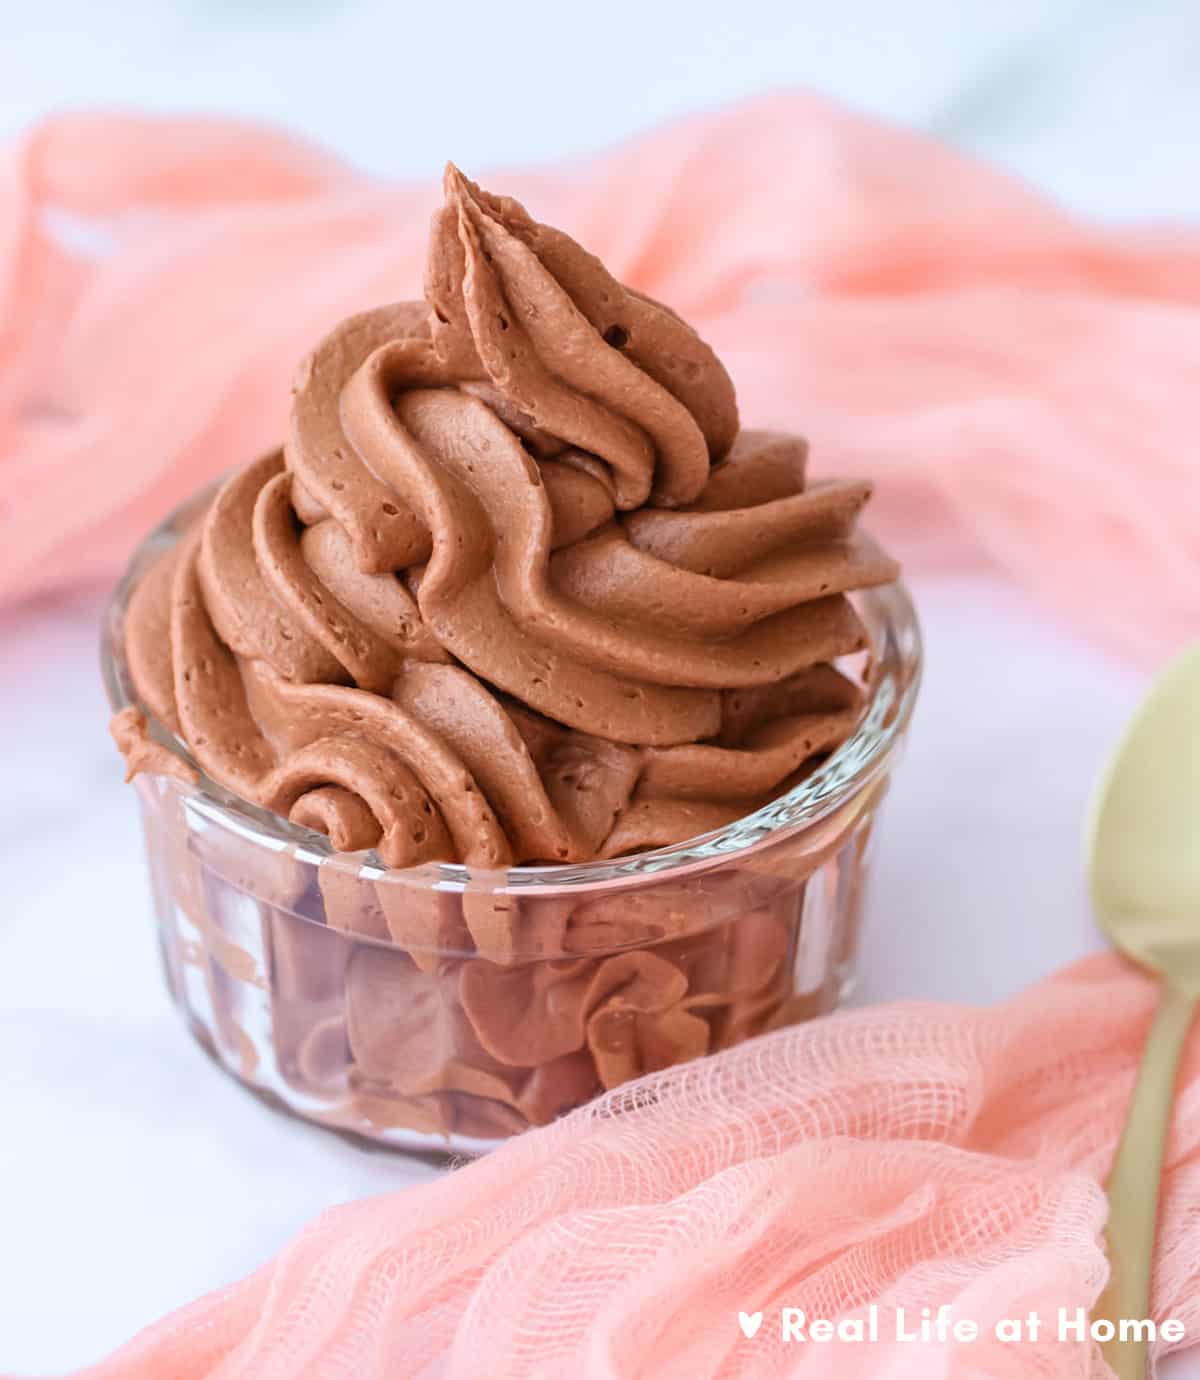 Homemade Chocolate Buttercream Frosting in a Glass Cup